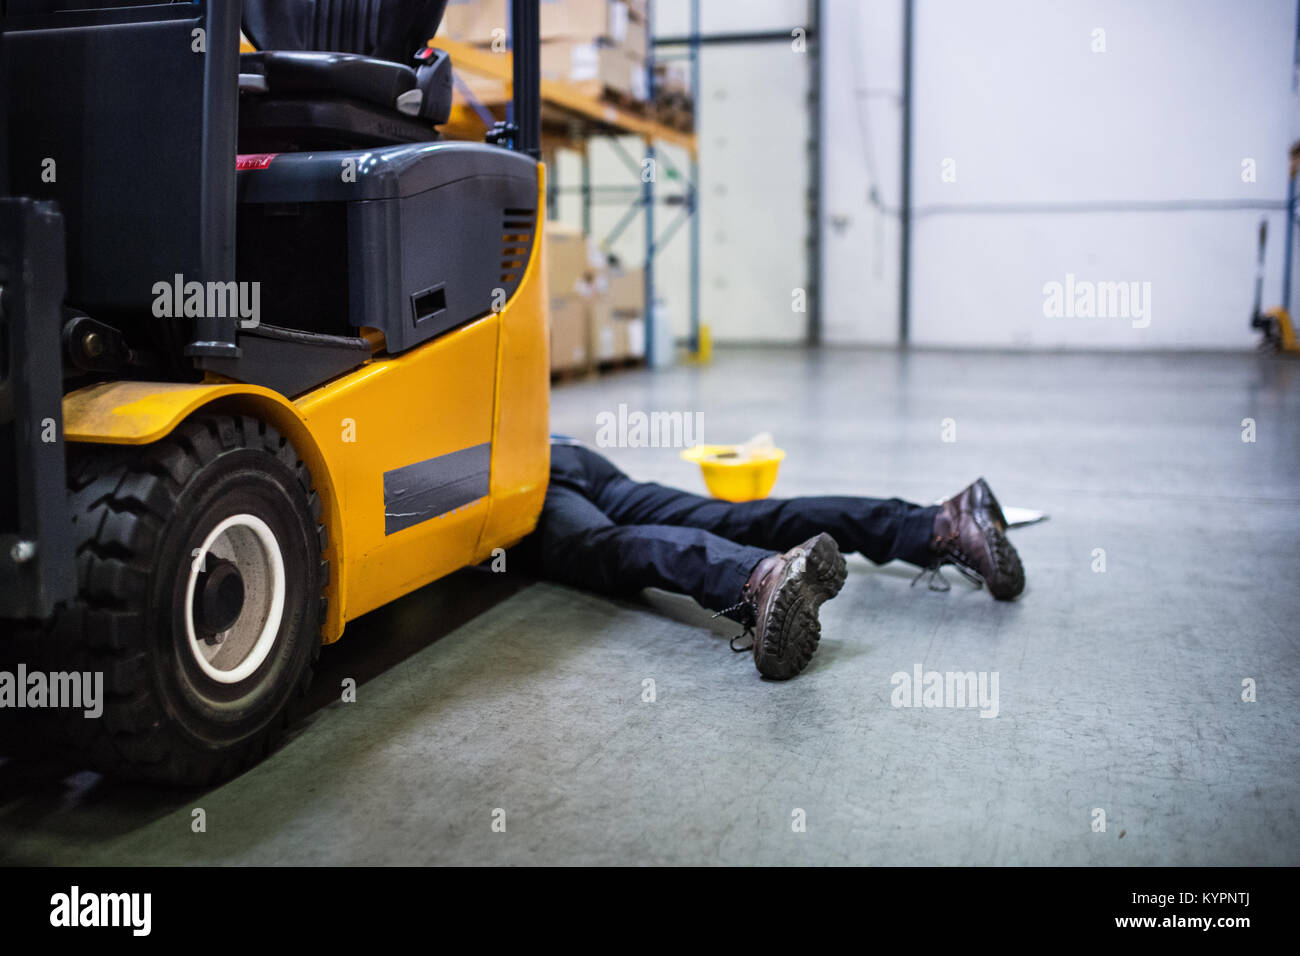 Warehouse Worker After An Accident In A Warehouse Stock Photo Alamy